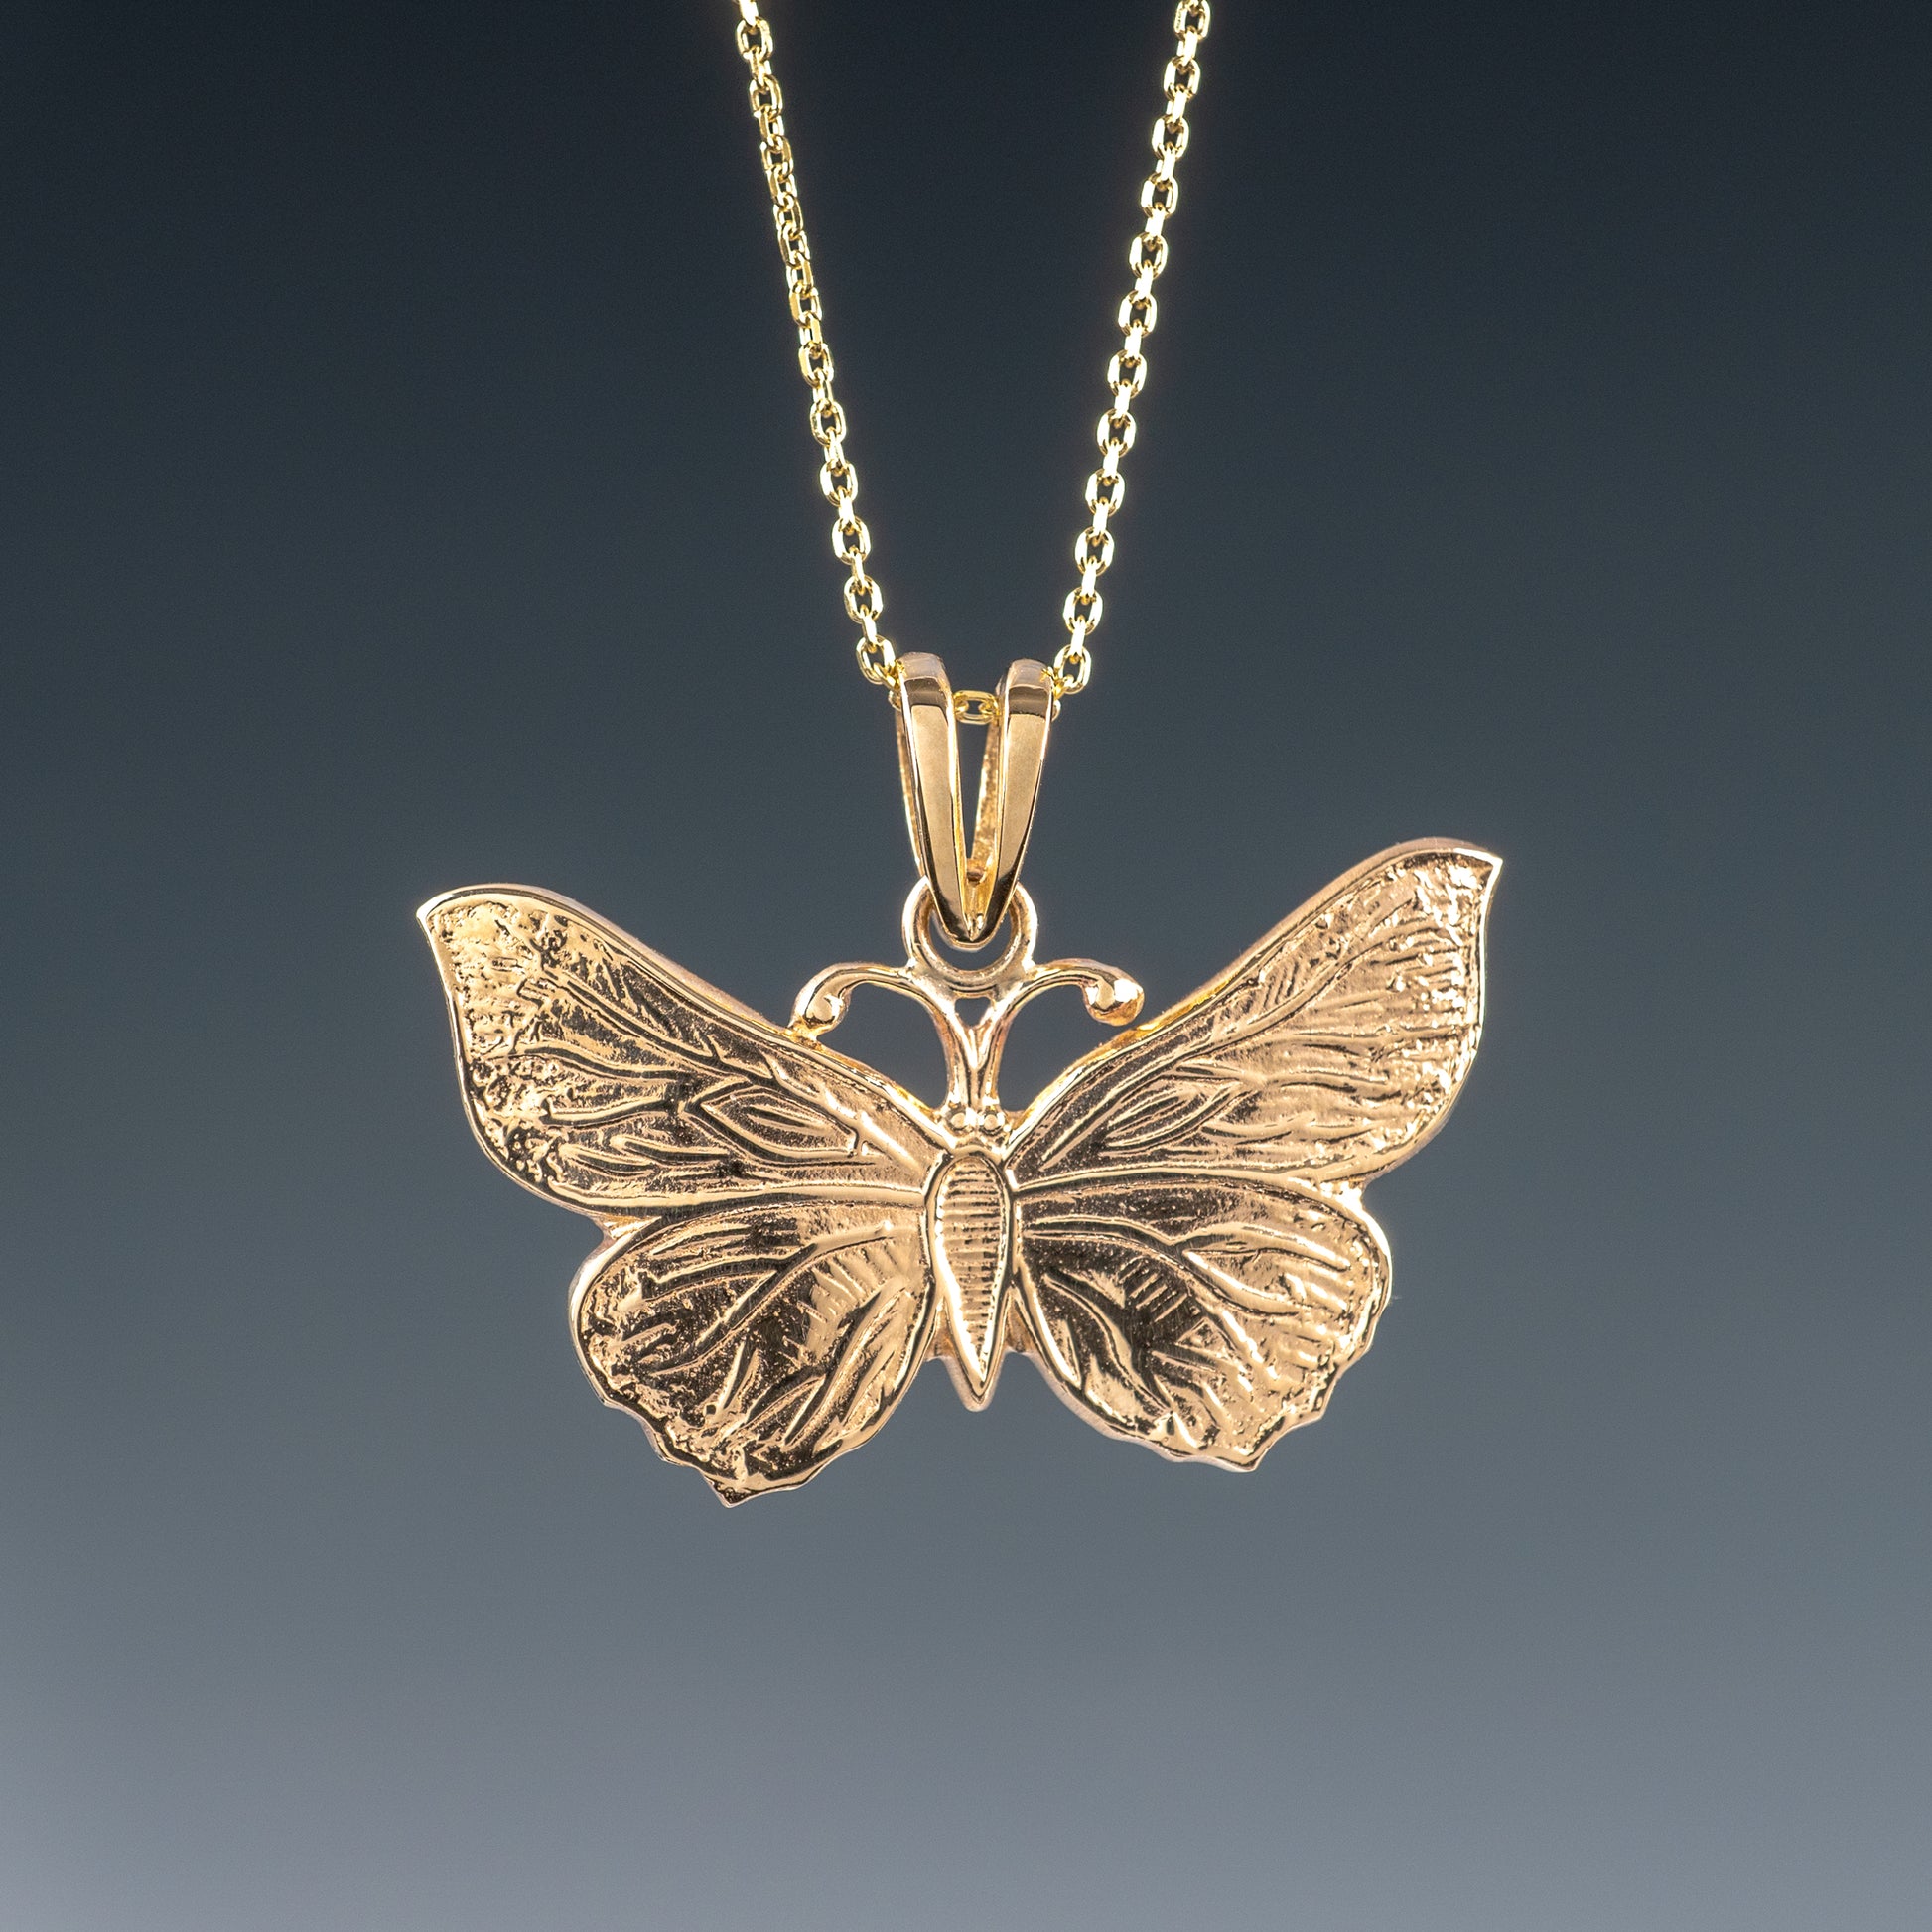 9ct Yellow Gold Butterfly Pendant Necklace Full Hallmarks - Hunters Fine Jewellery